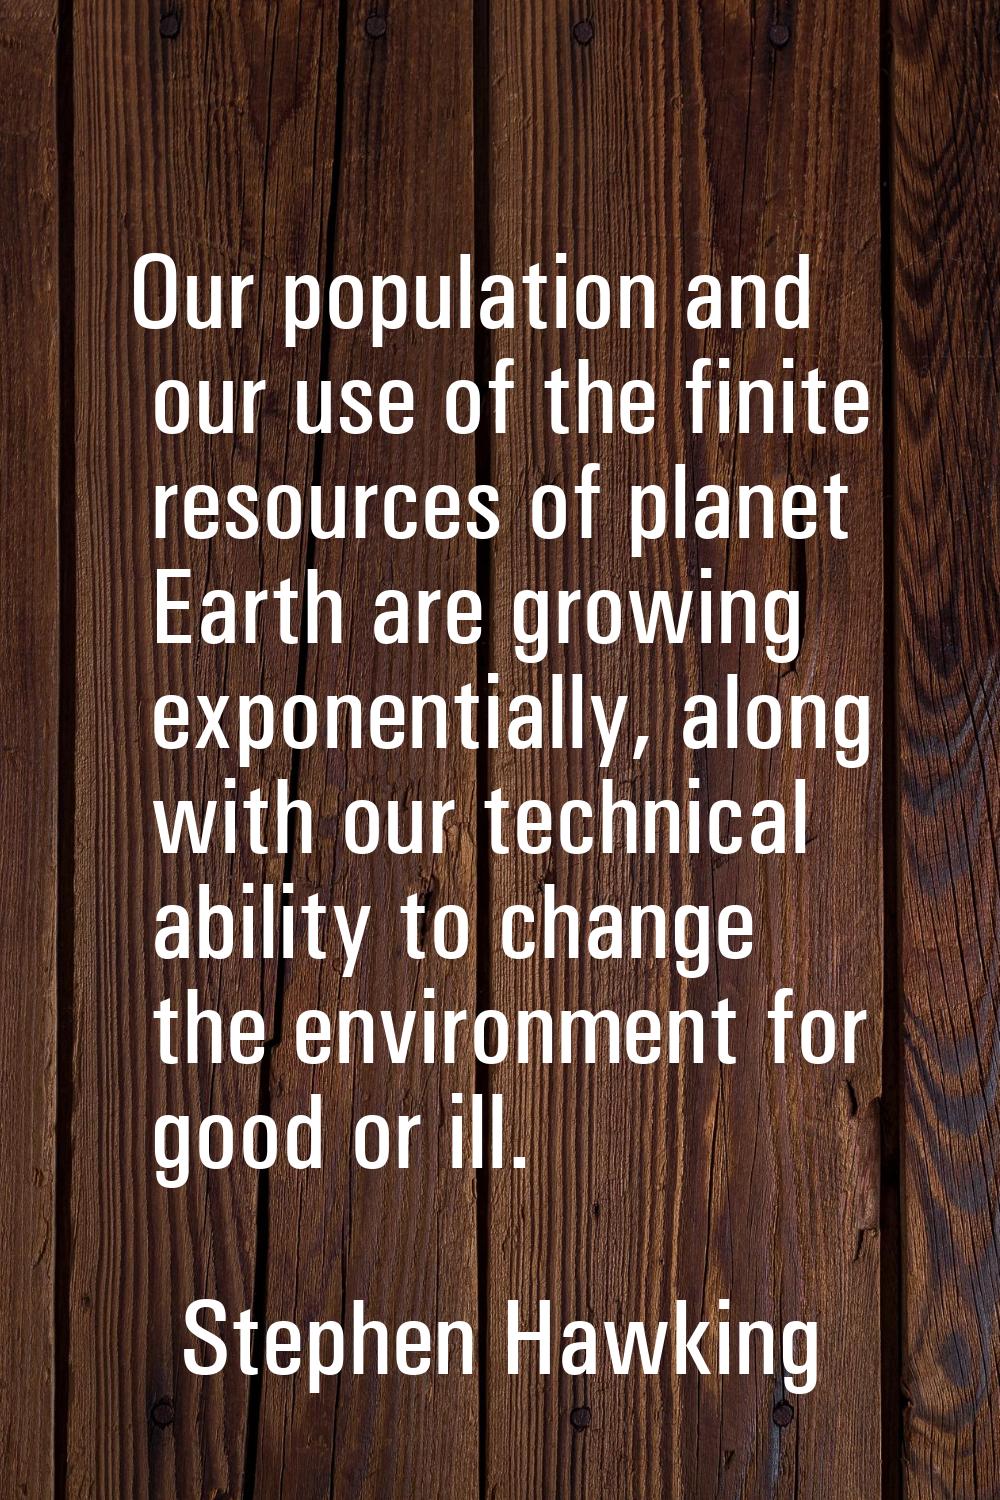 Our population and our use of the finite resources of planet Earth are growing exponentially, along